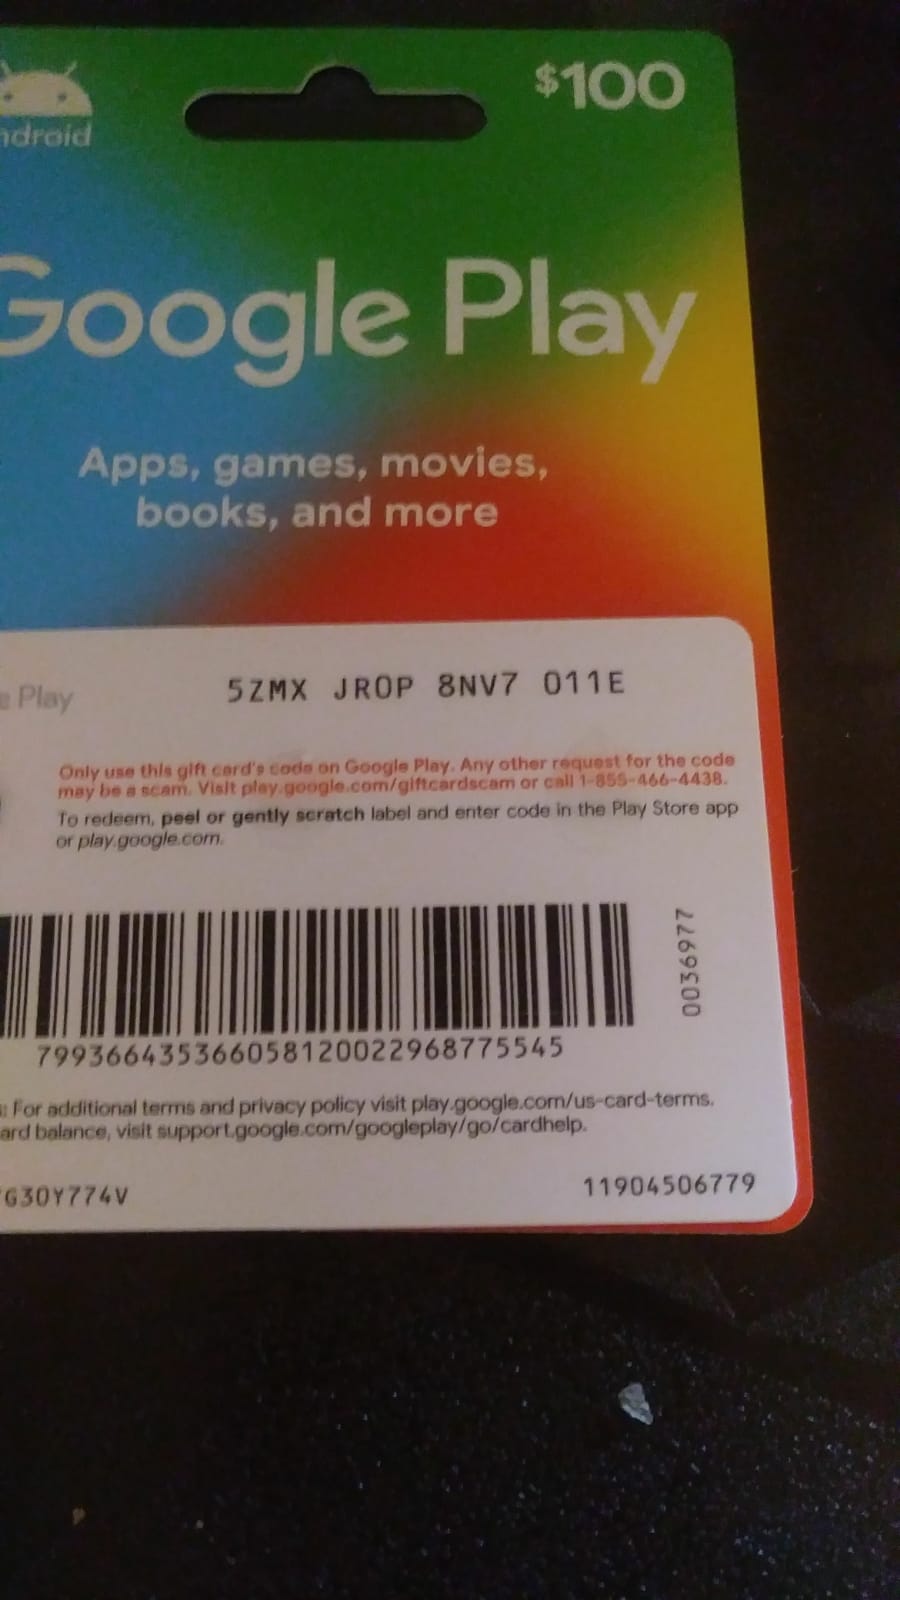 Google Play Redeem Codes for 8 March - Get Your Free Gift Cards Now! - bitcoinhelp.fun